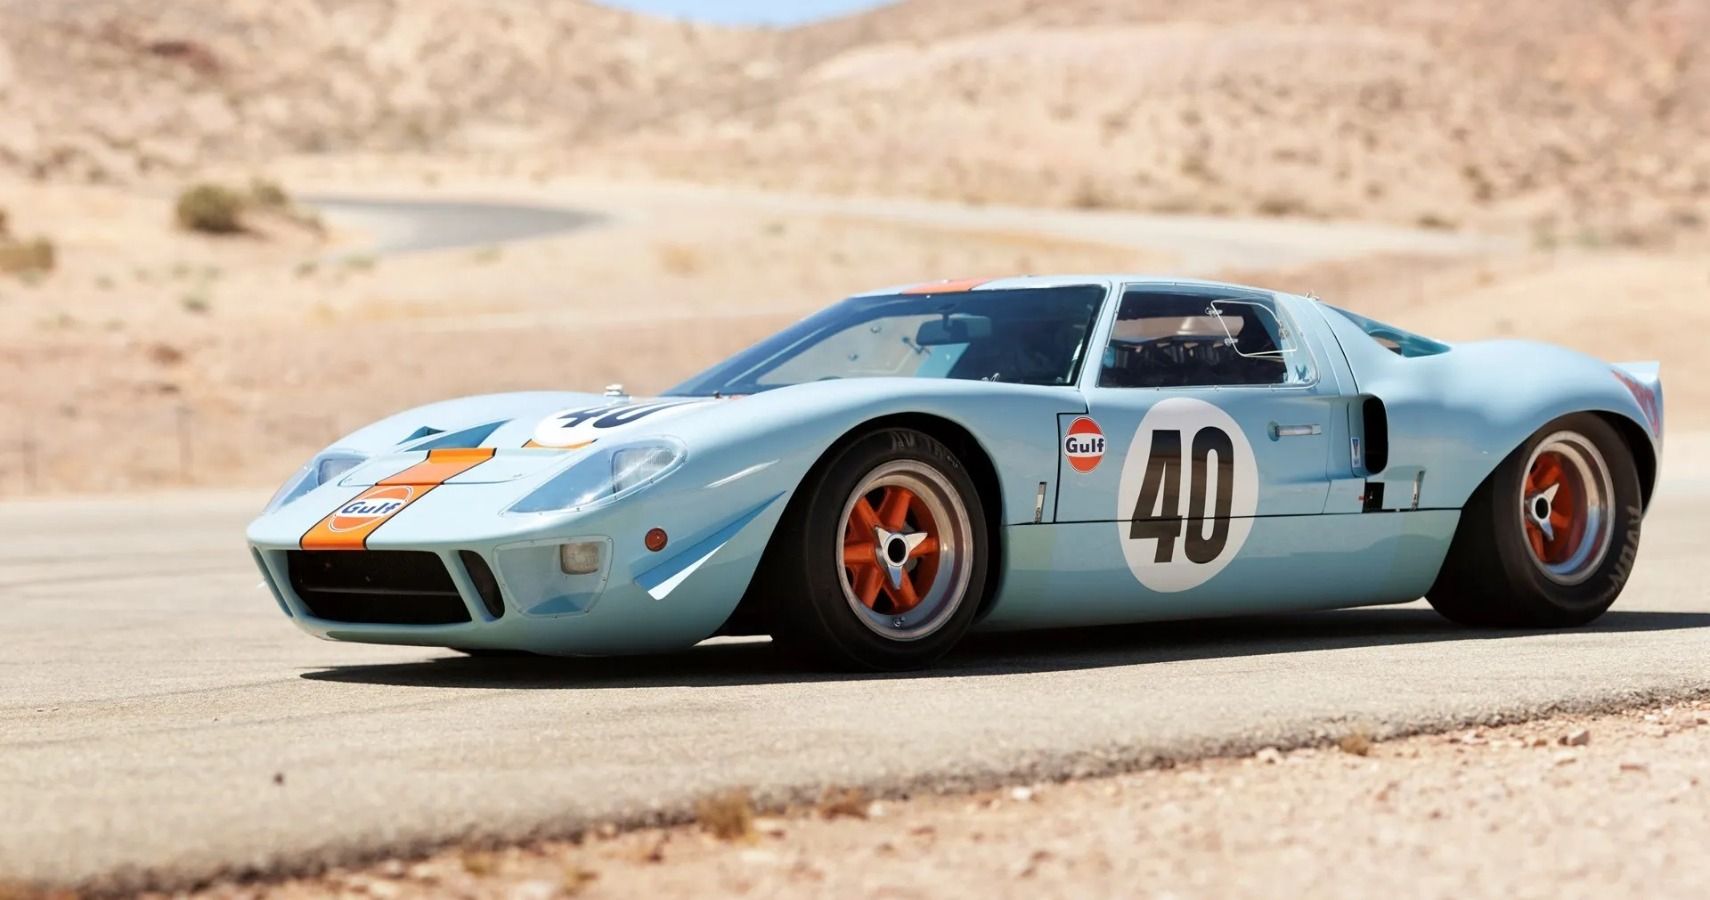 The 1968 Ford GT40 Le Mans movie car on display. 